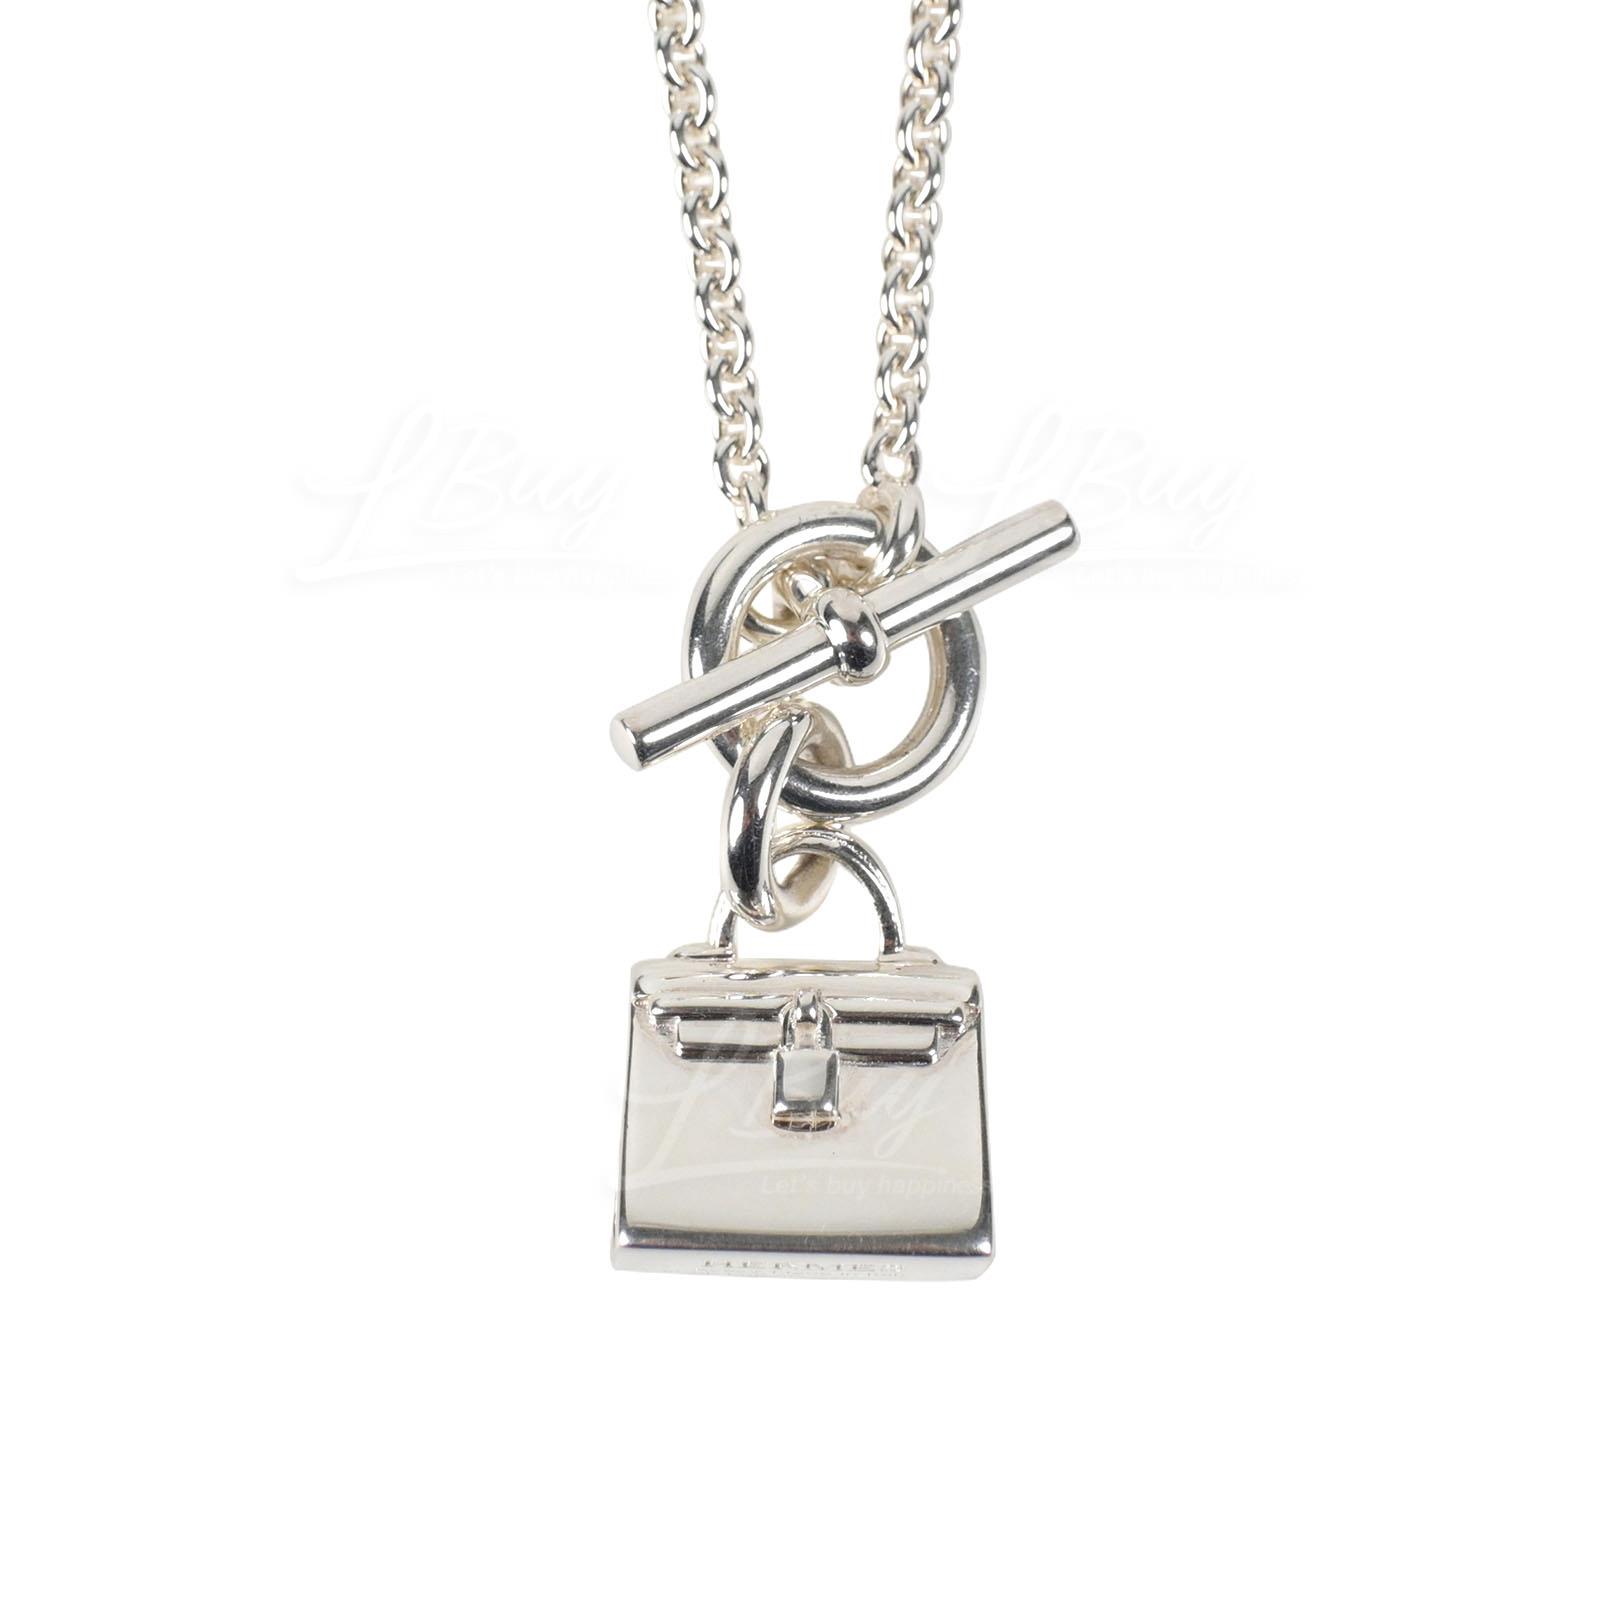 Hermes Amulettes Kelly Pendant 925 Sterling Silver Necklace